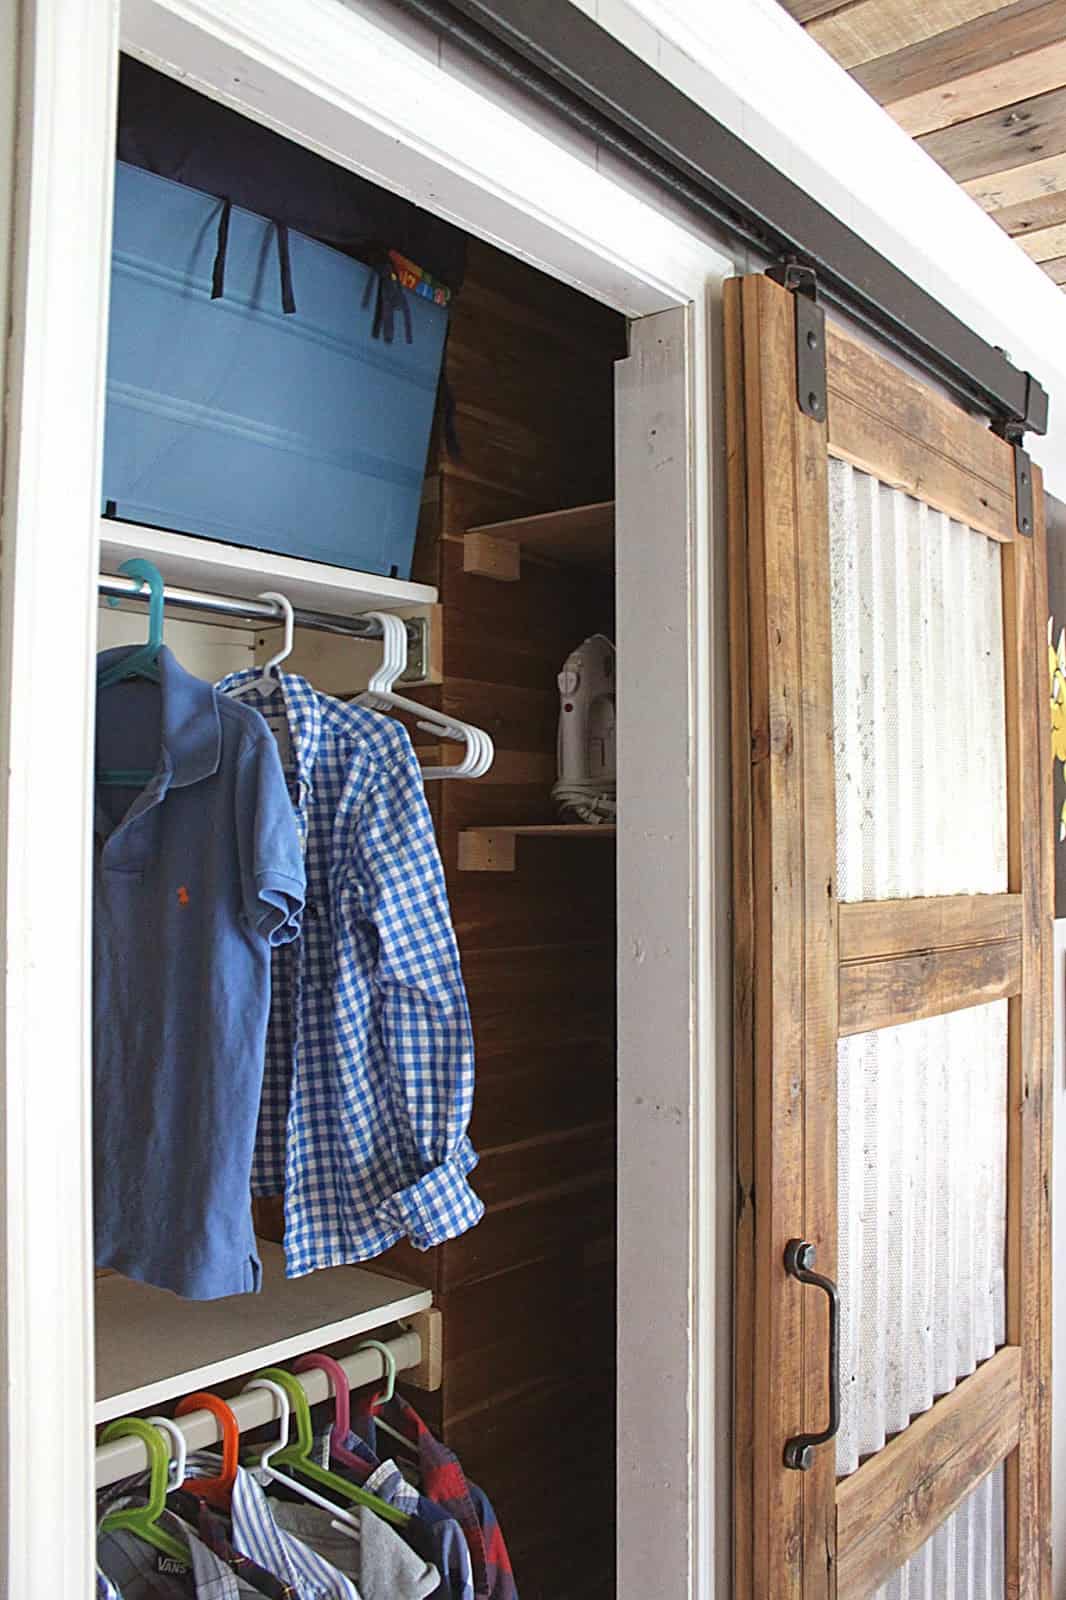 Corrugated metal and wood barn door for the closet